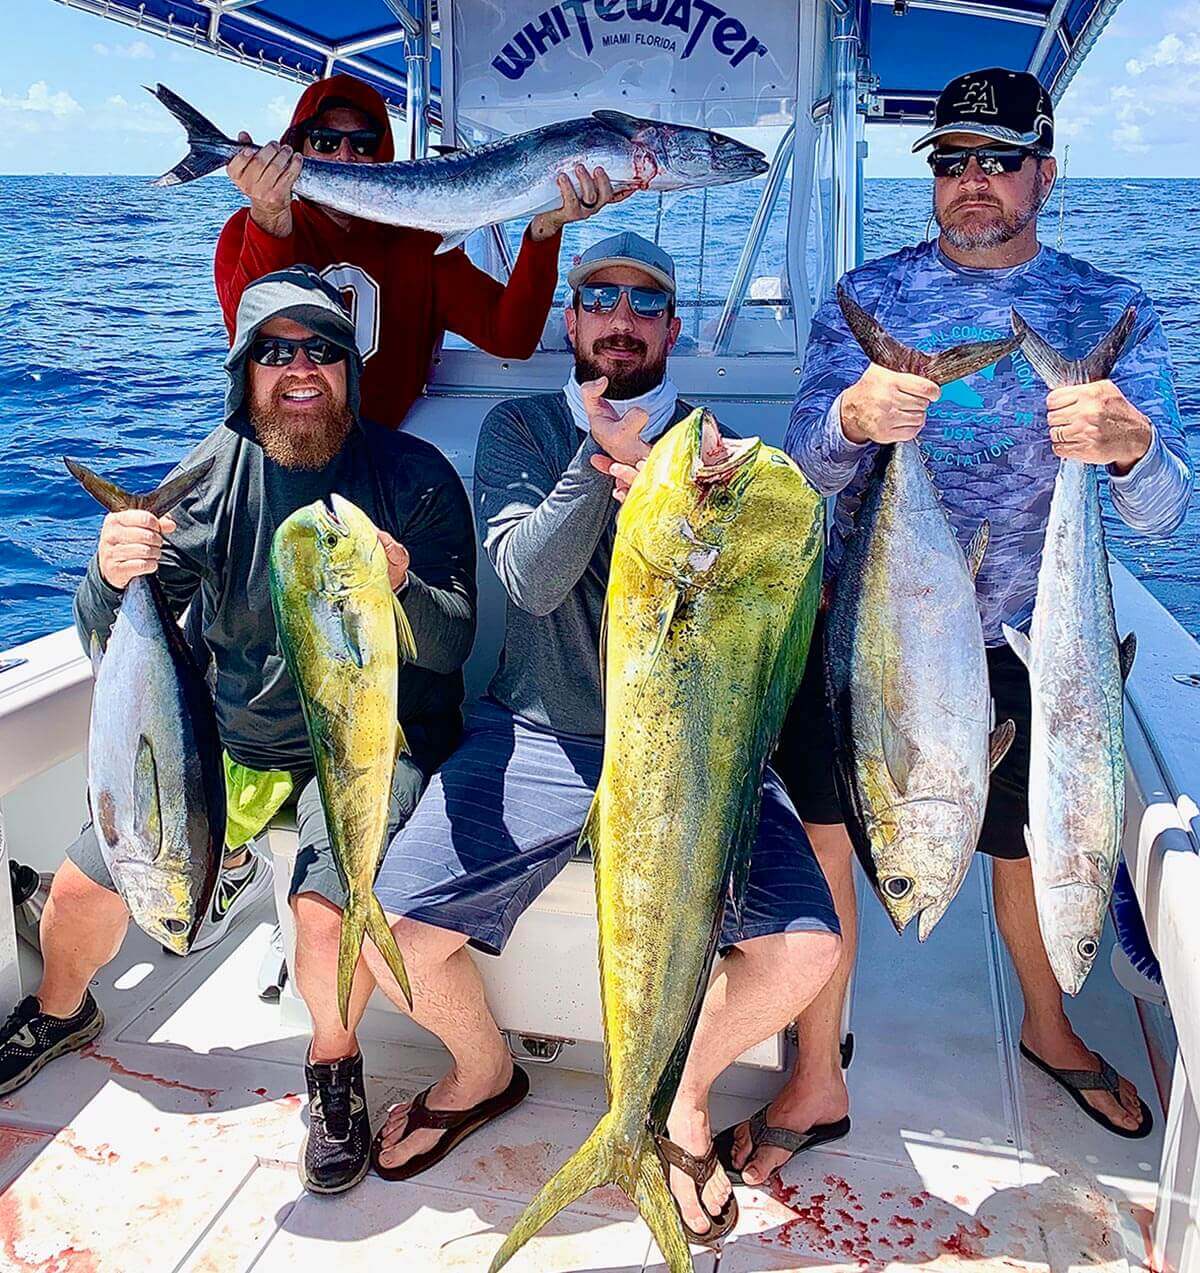 The Ultimate Guide to Booking the Best Fishing Charters and Party